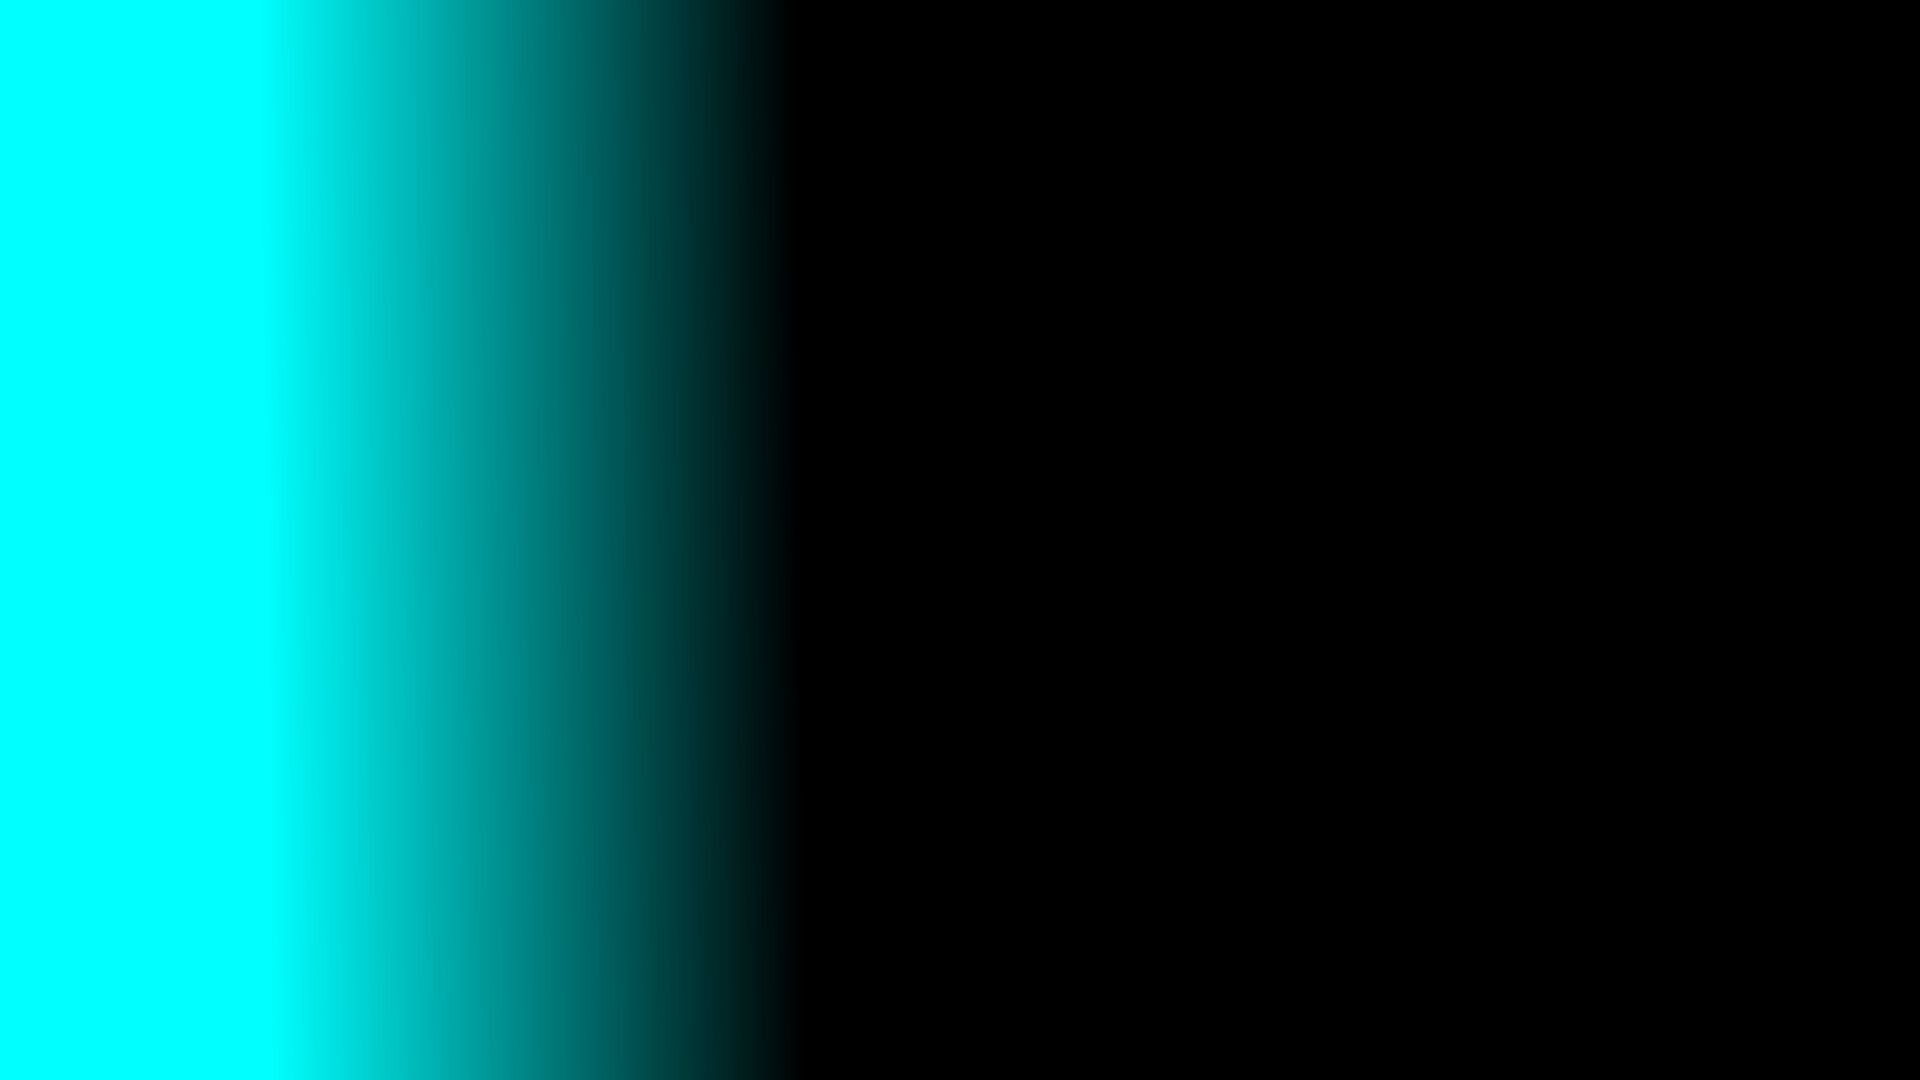 Black and Teal Wallpapers - 4k, HD Black and Teal Backgrounds on WallpaperBat